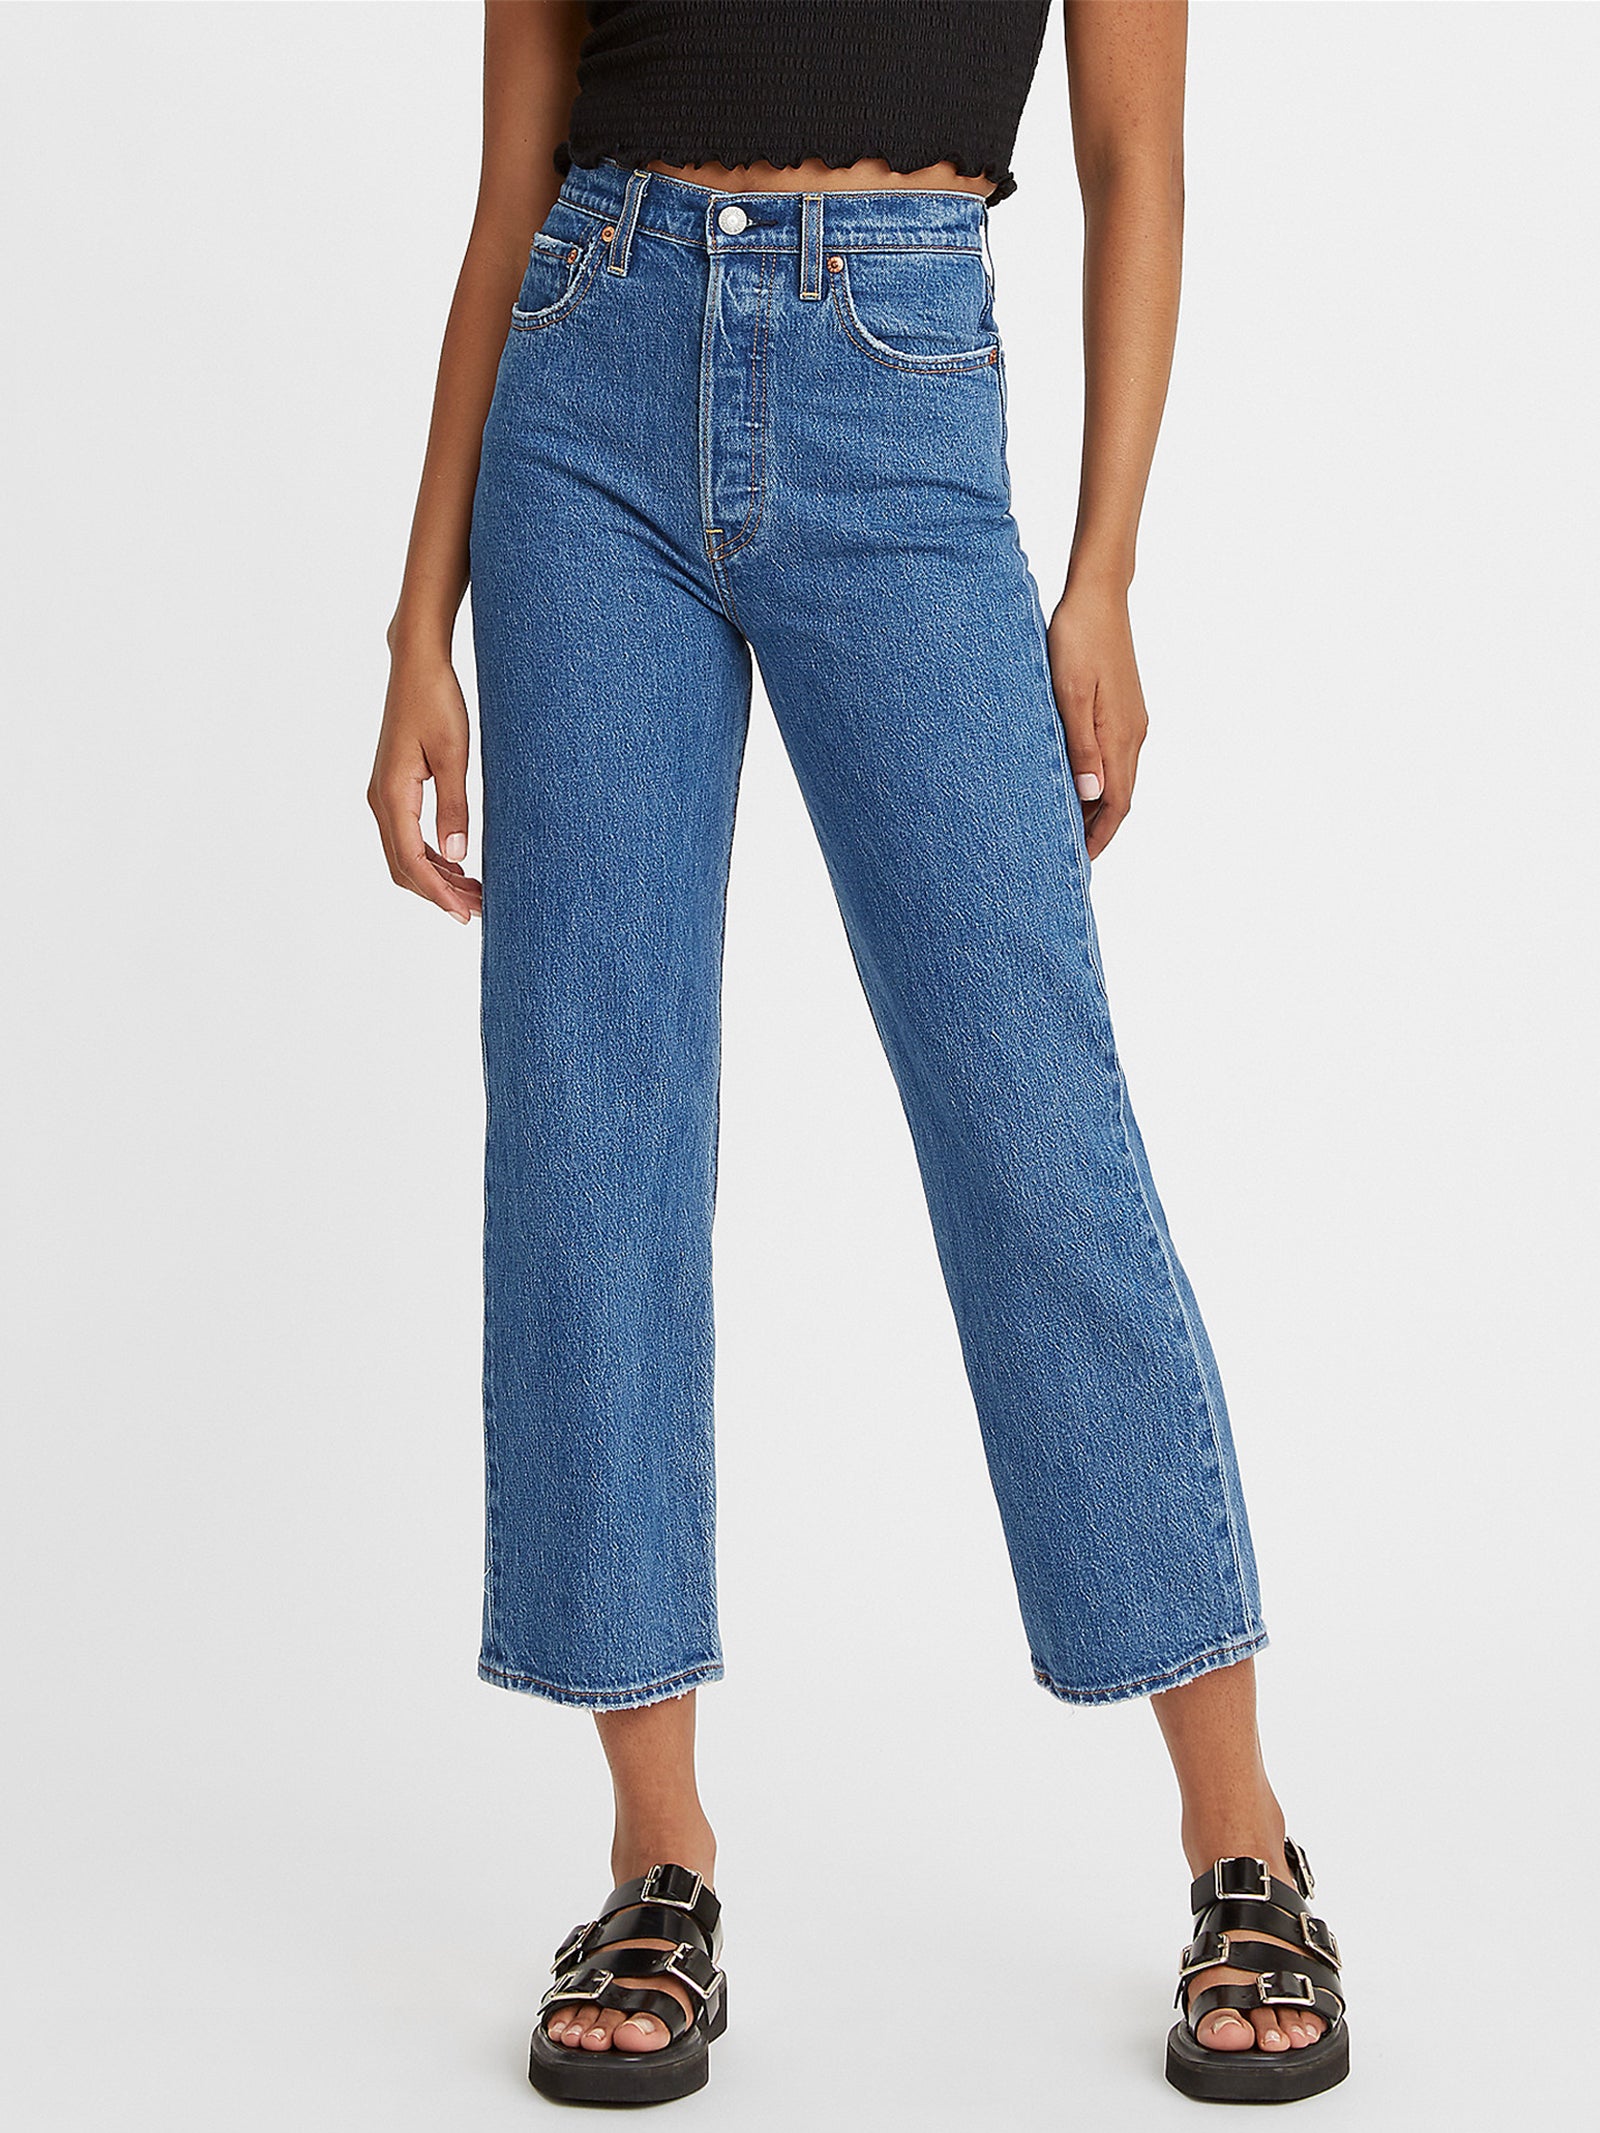 Ribcage Straight Ankle Jean